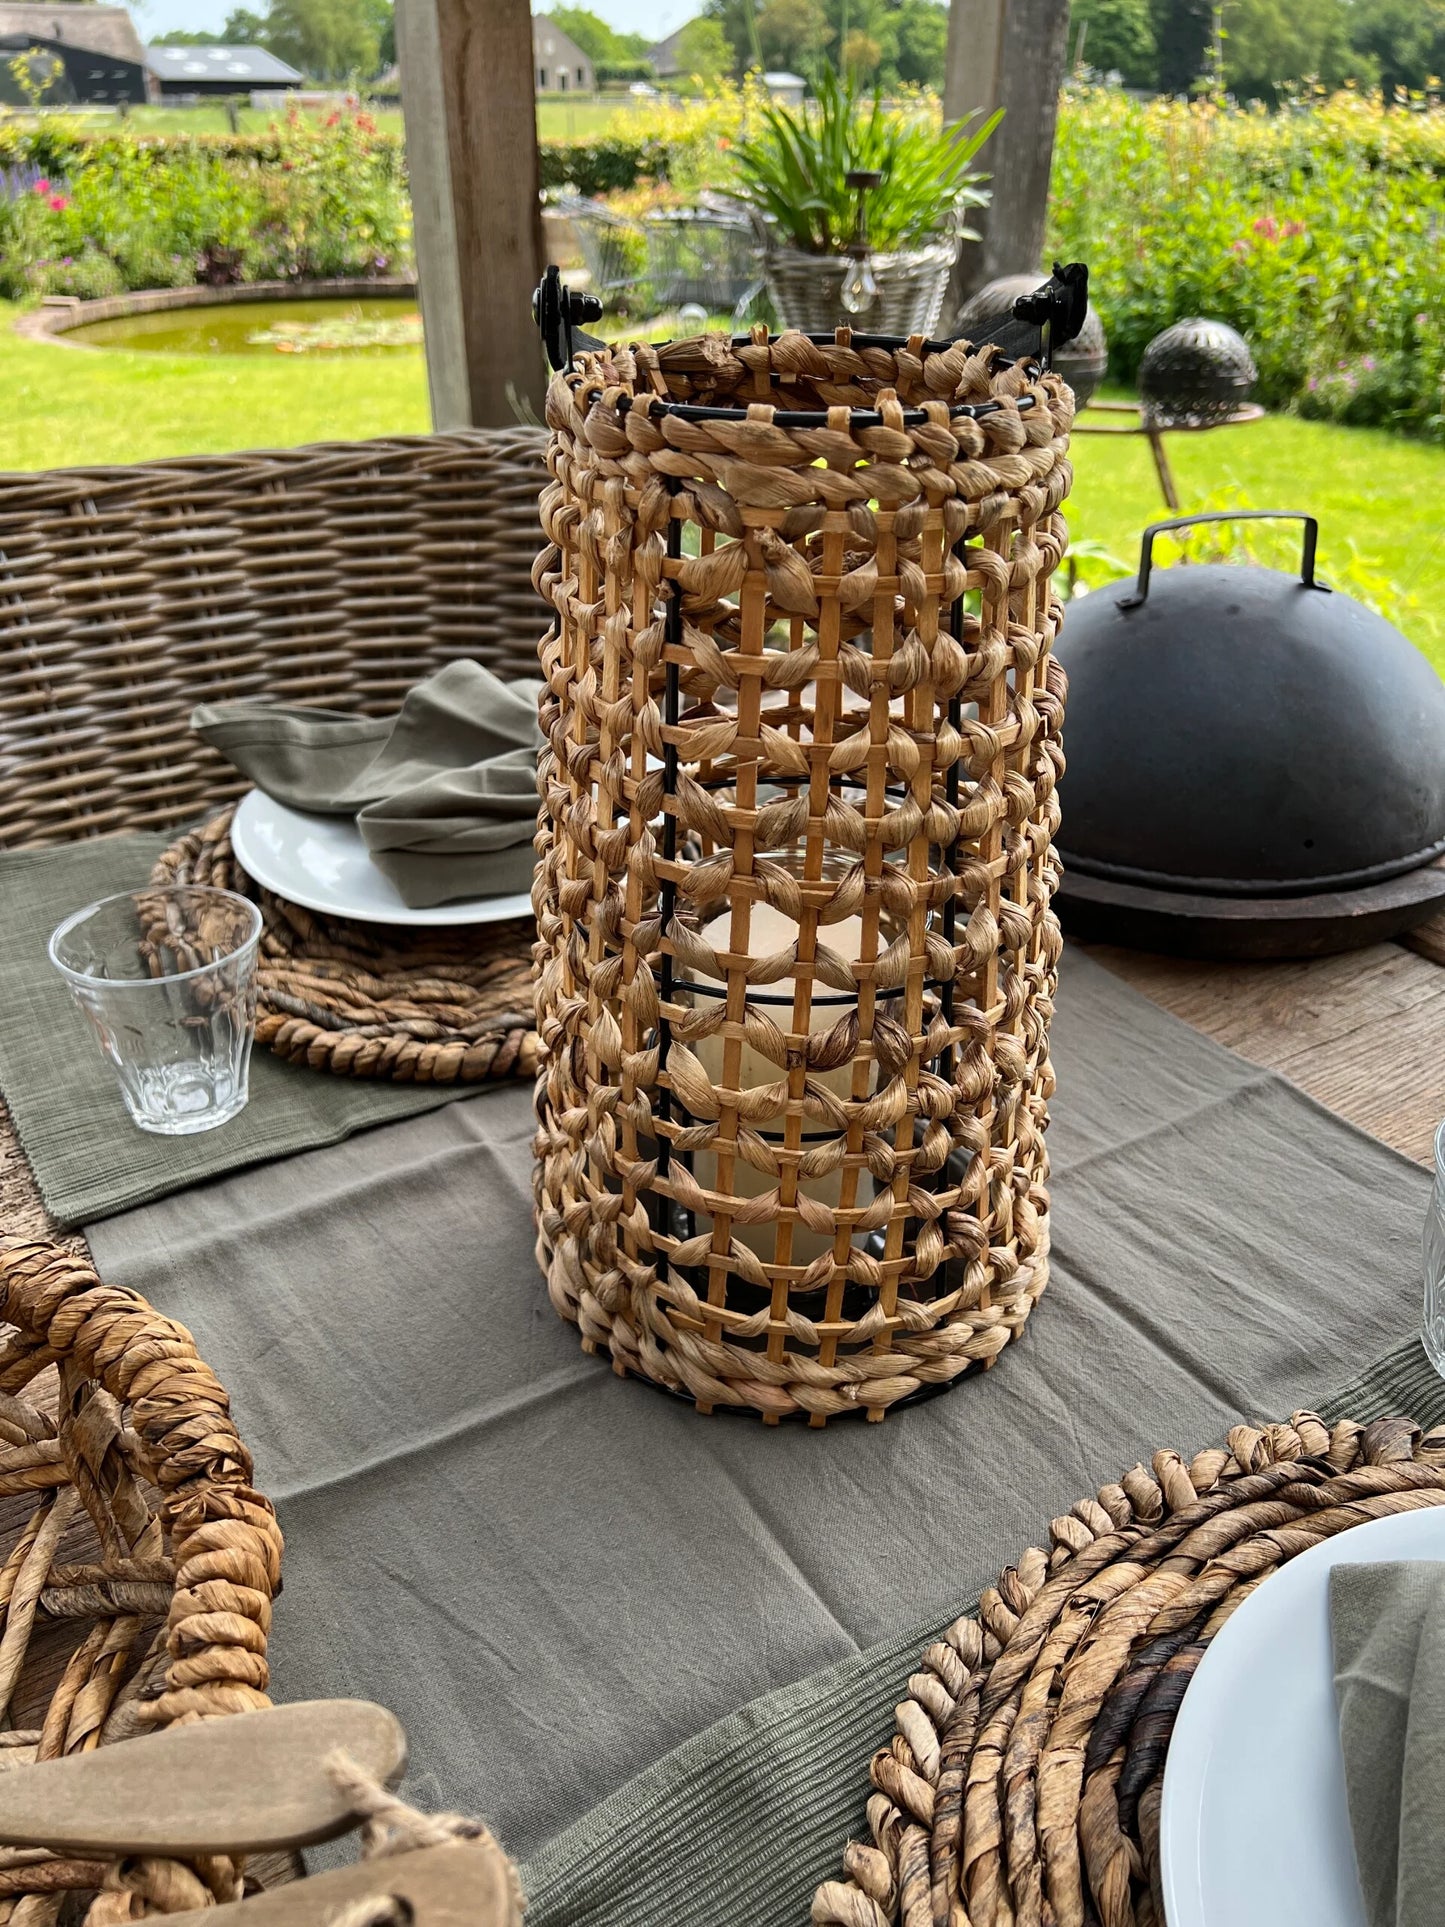 Table runner available in Green, Grey, Black and Stone White